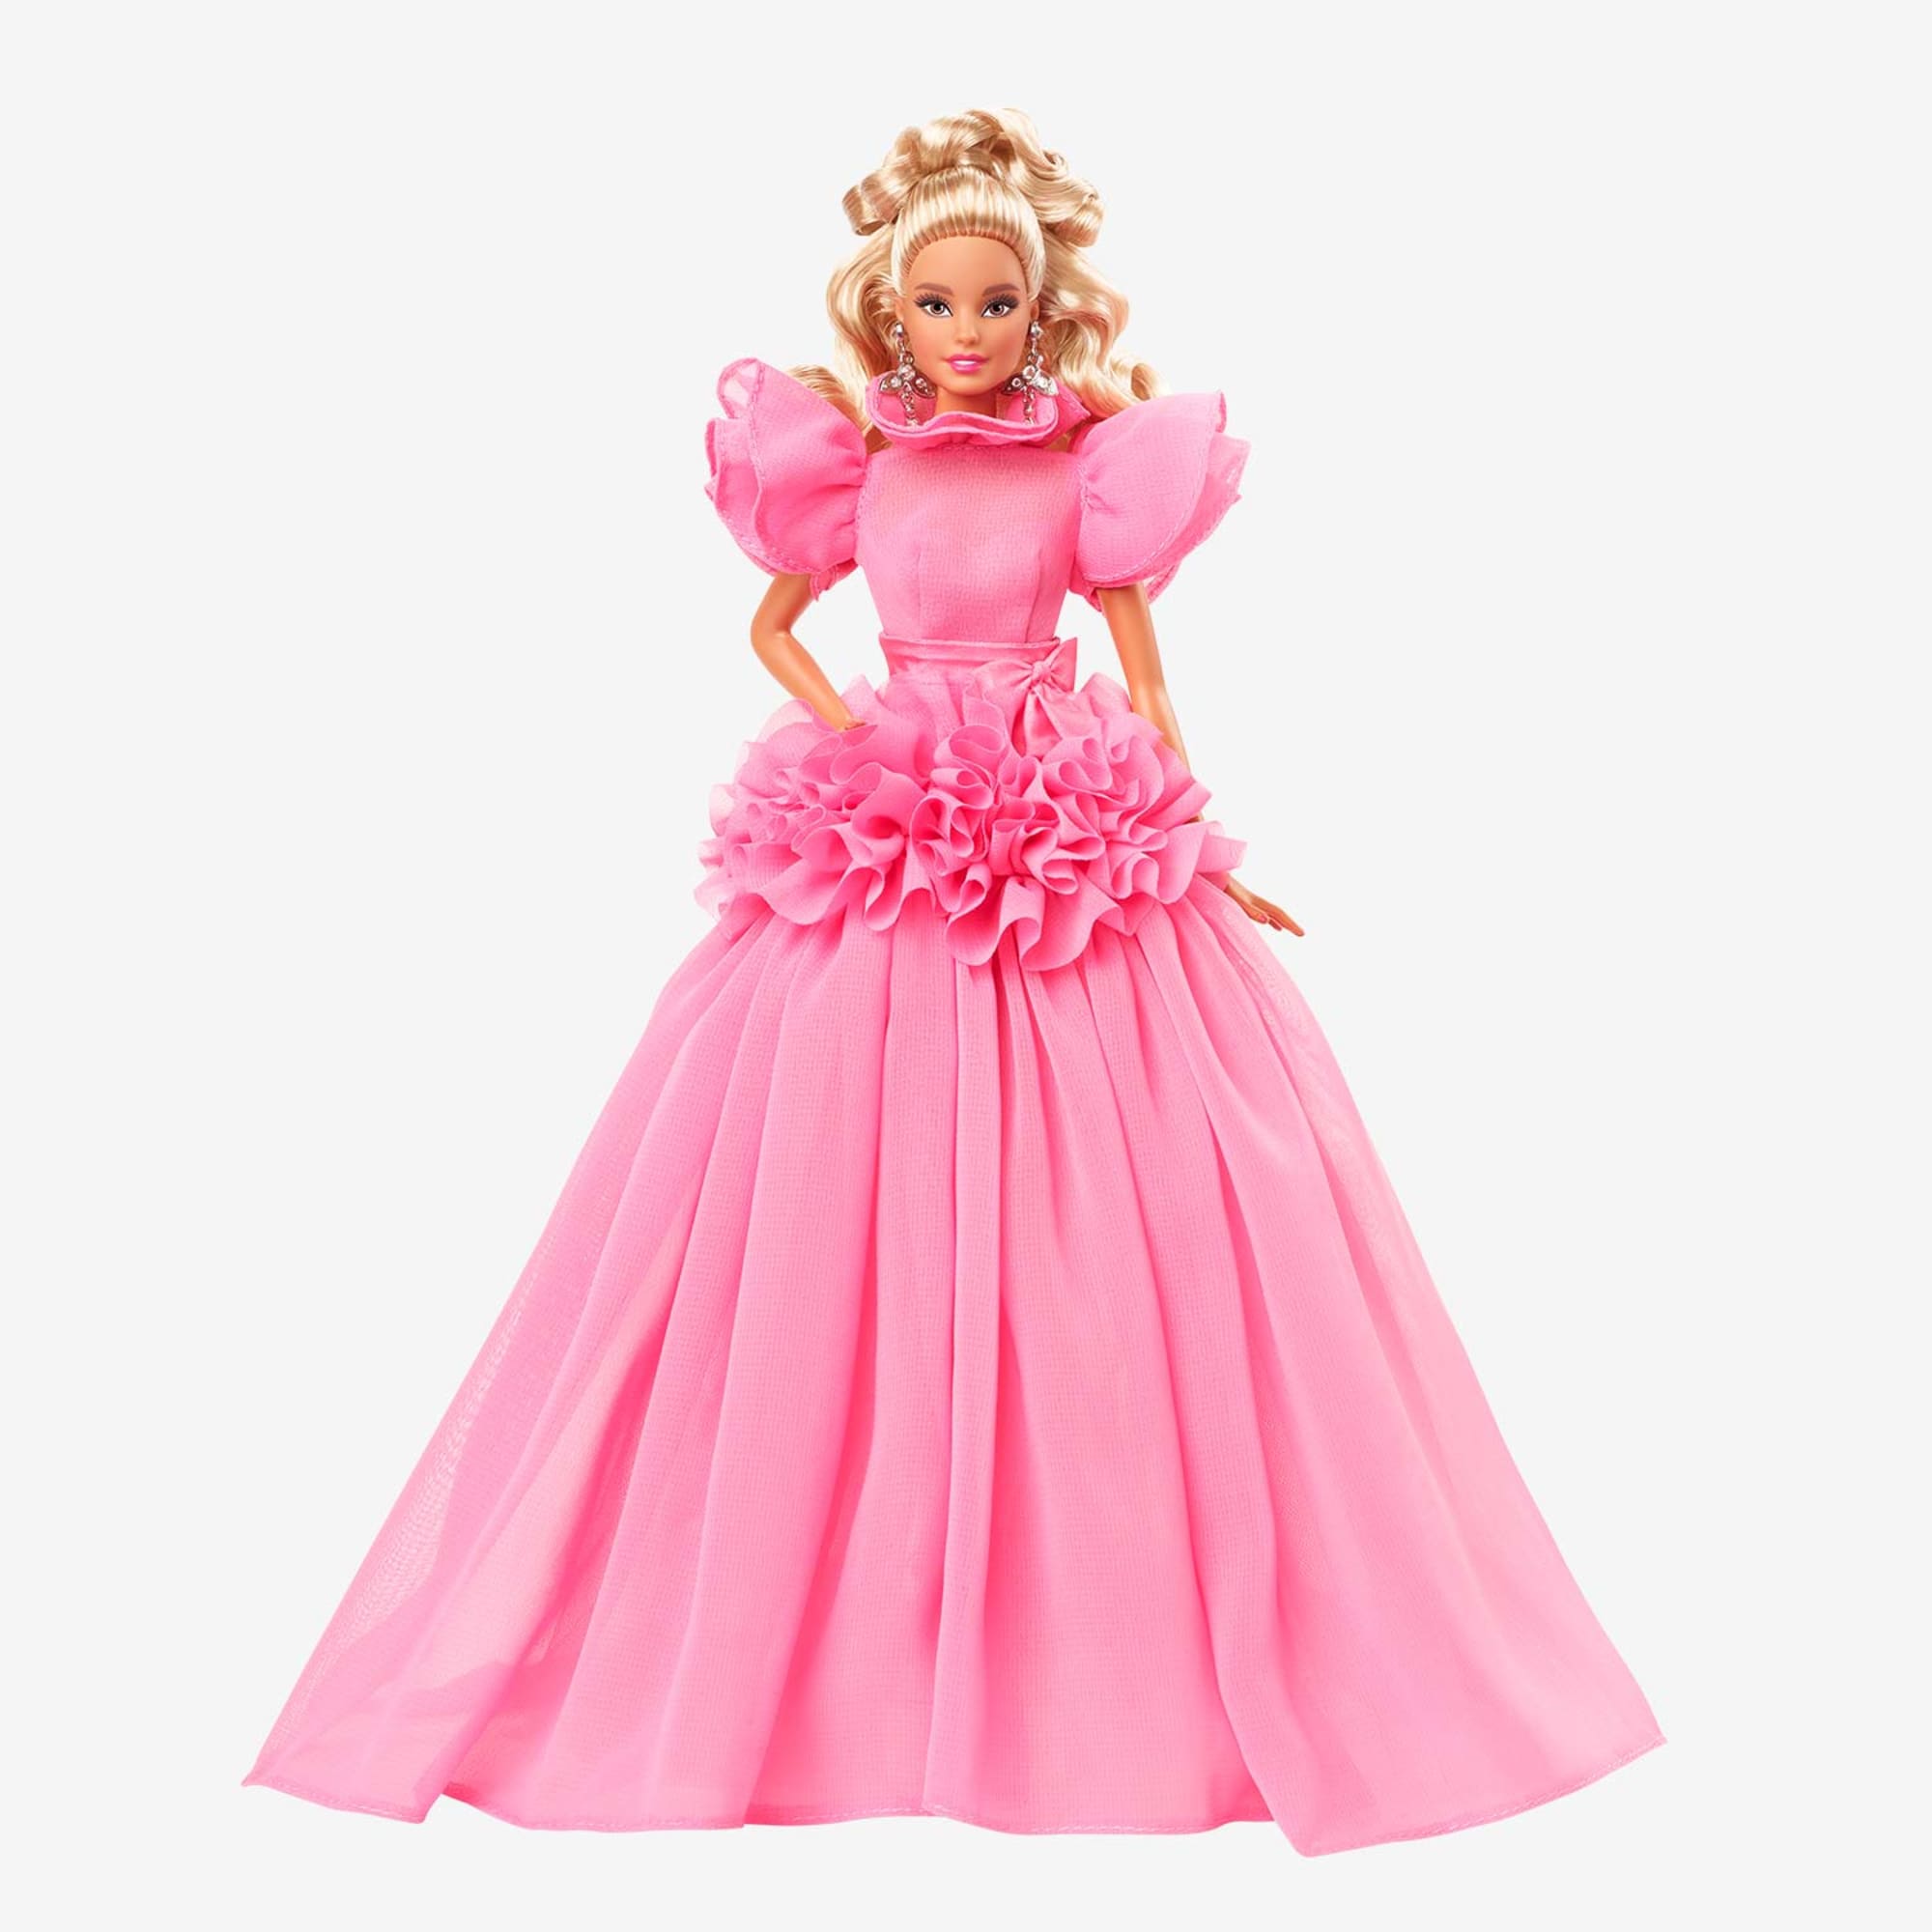 Barbie Pink Collection Doll Vlrengbr 